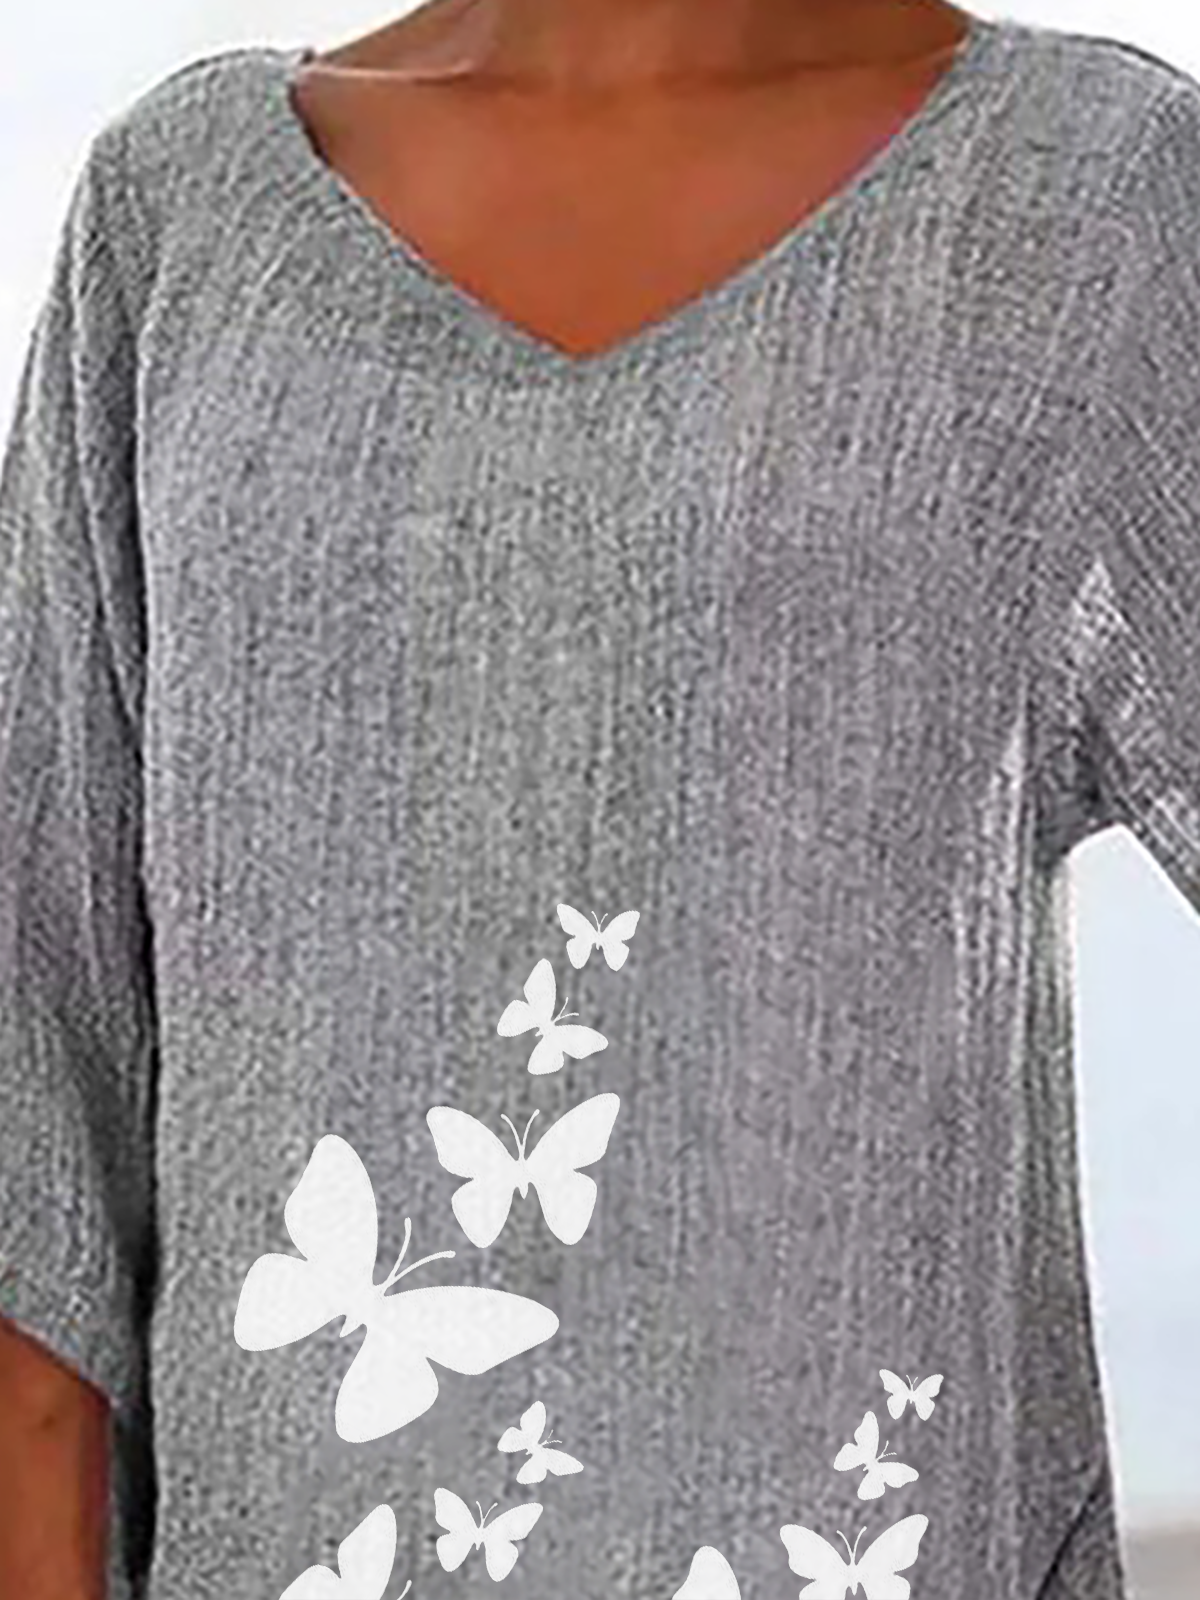 Printed Butterfly Top